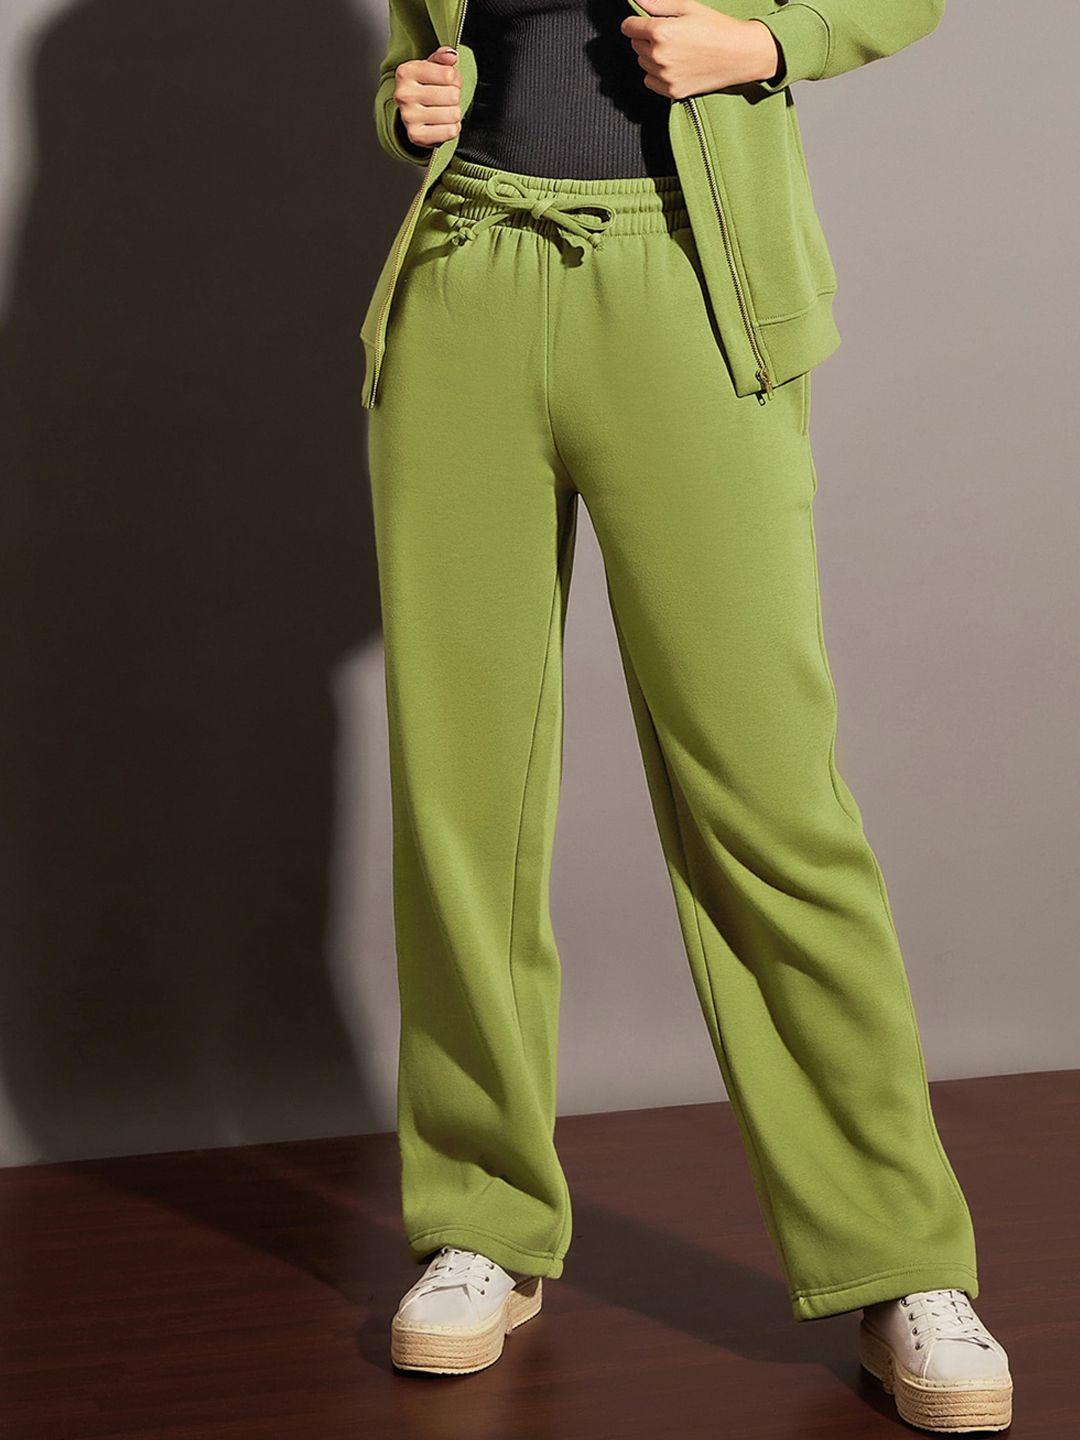 sassafras-women-olive-relaxed-fit-mid-rise-fleece-track-pants